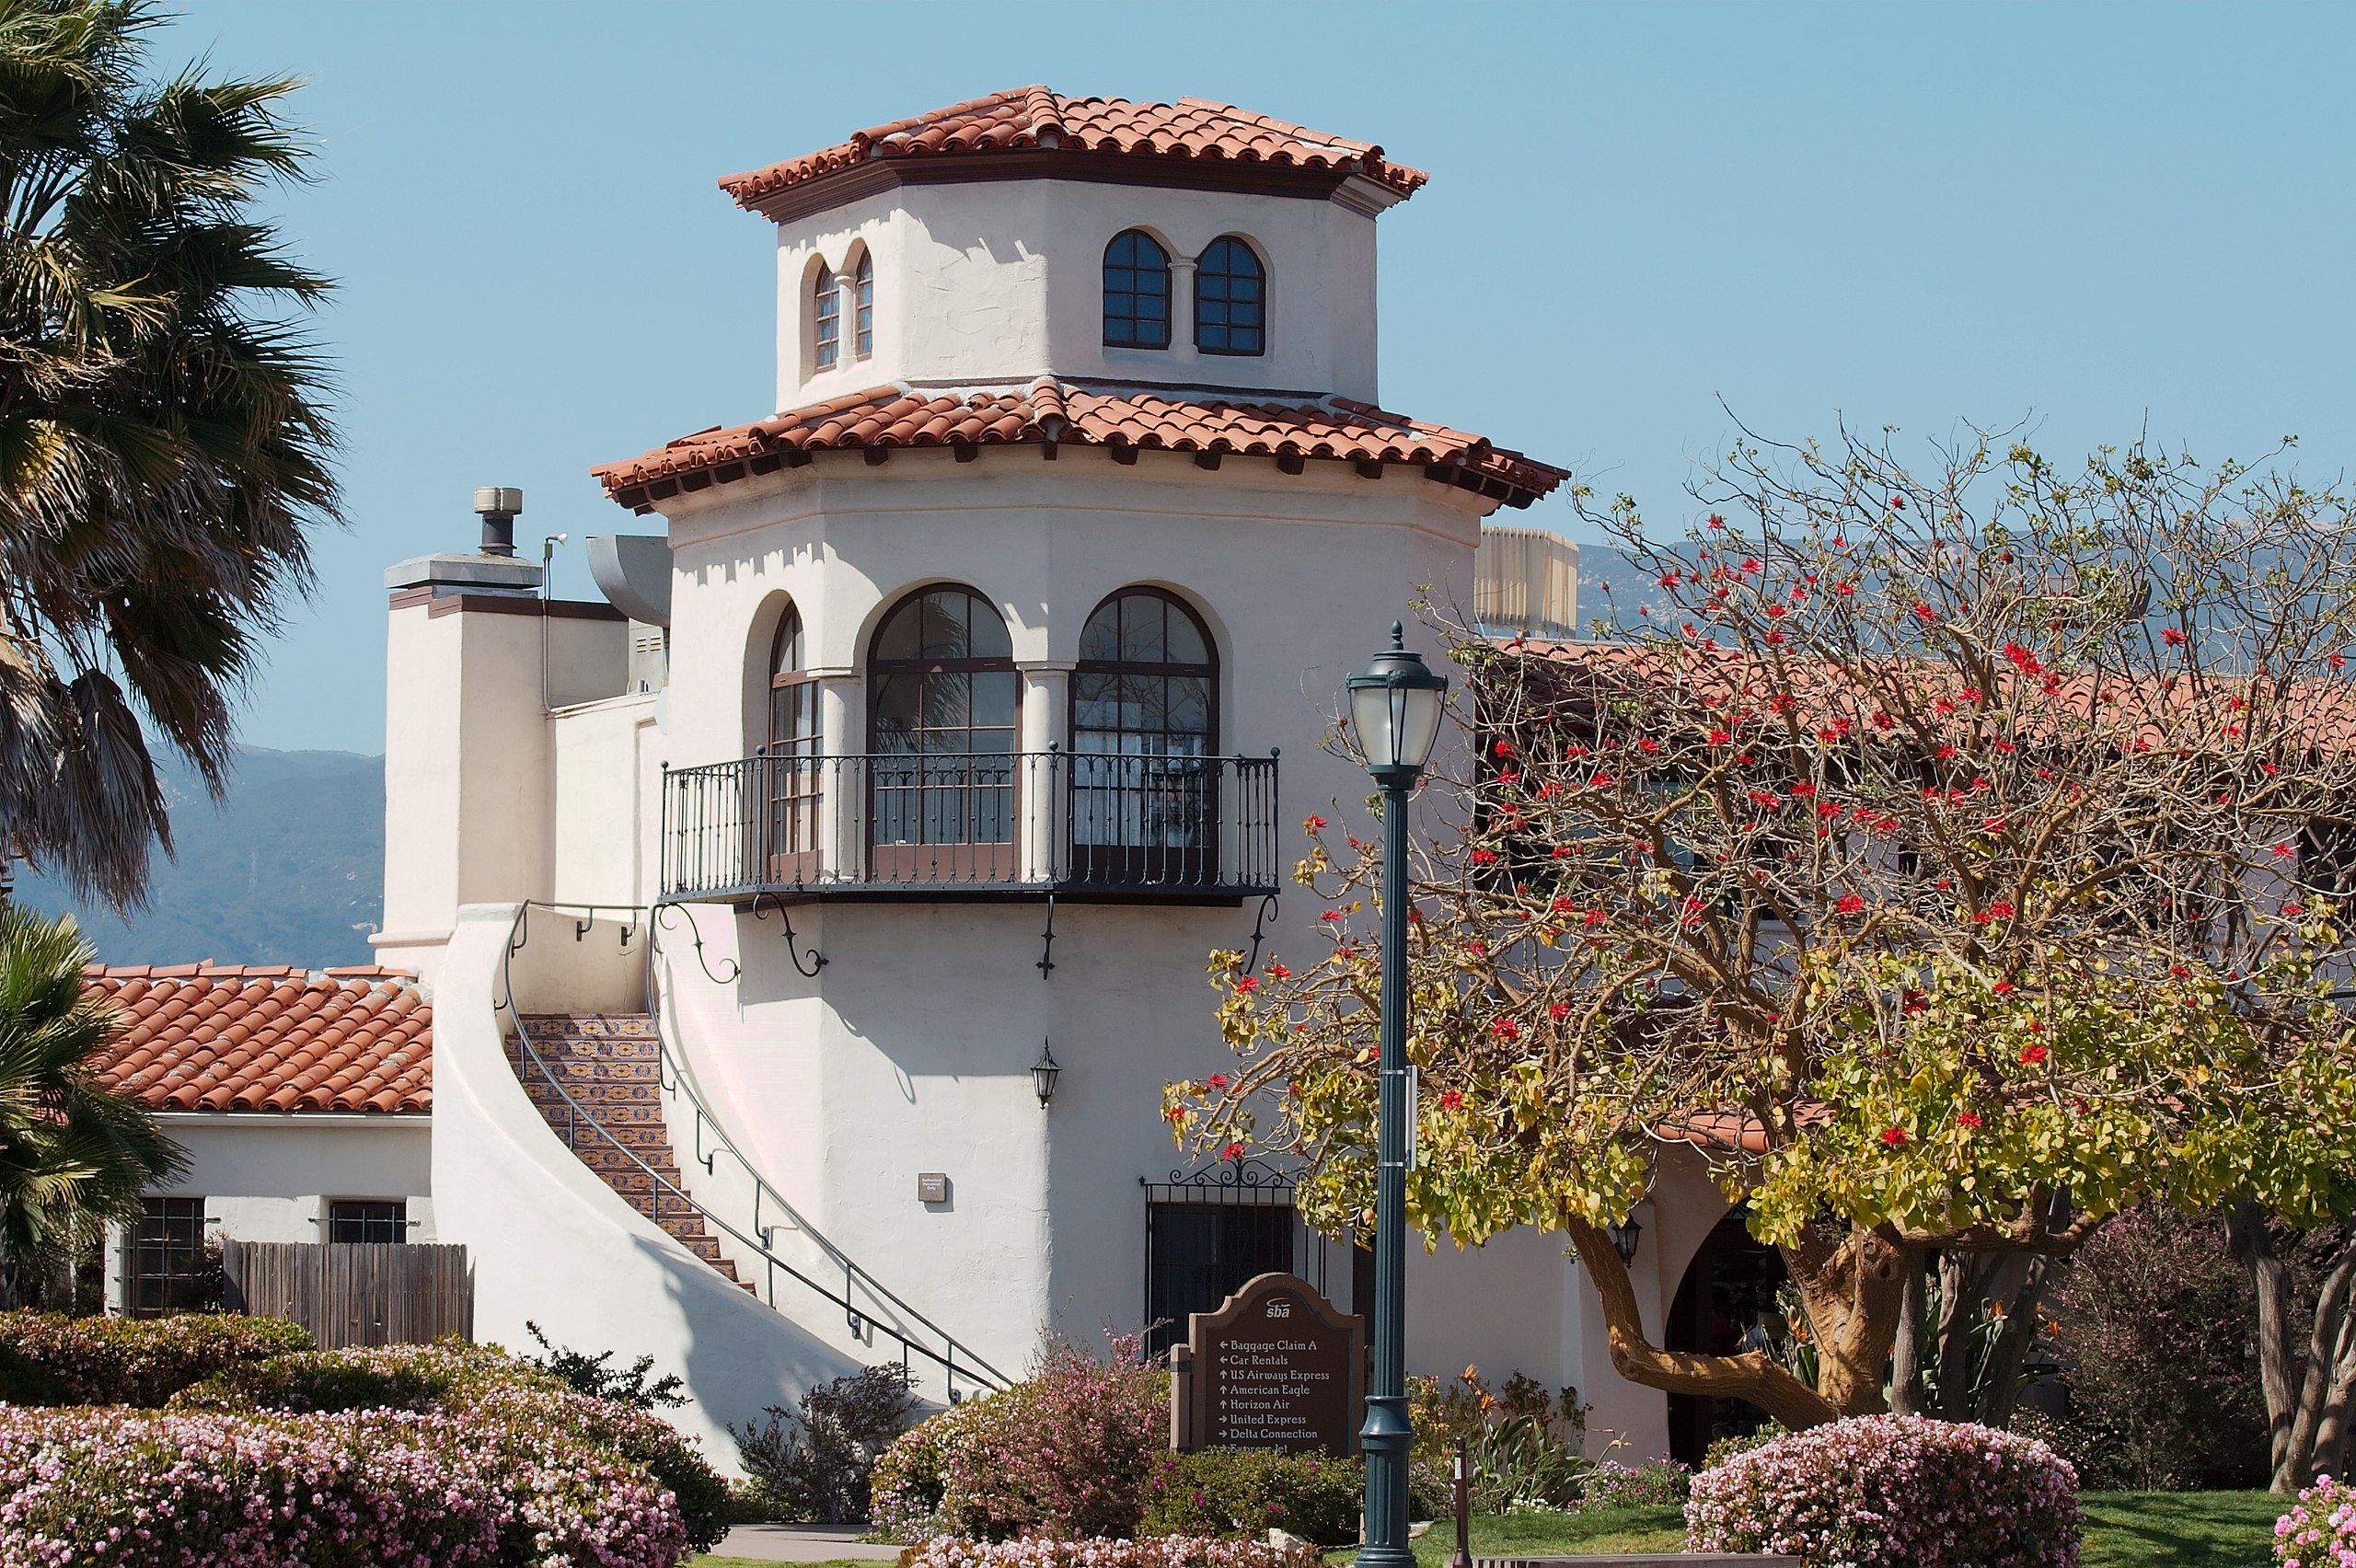 The Tower at the Santa Barbar Airport with its red tiled roof, gently curving staircase, and arched windows.